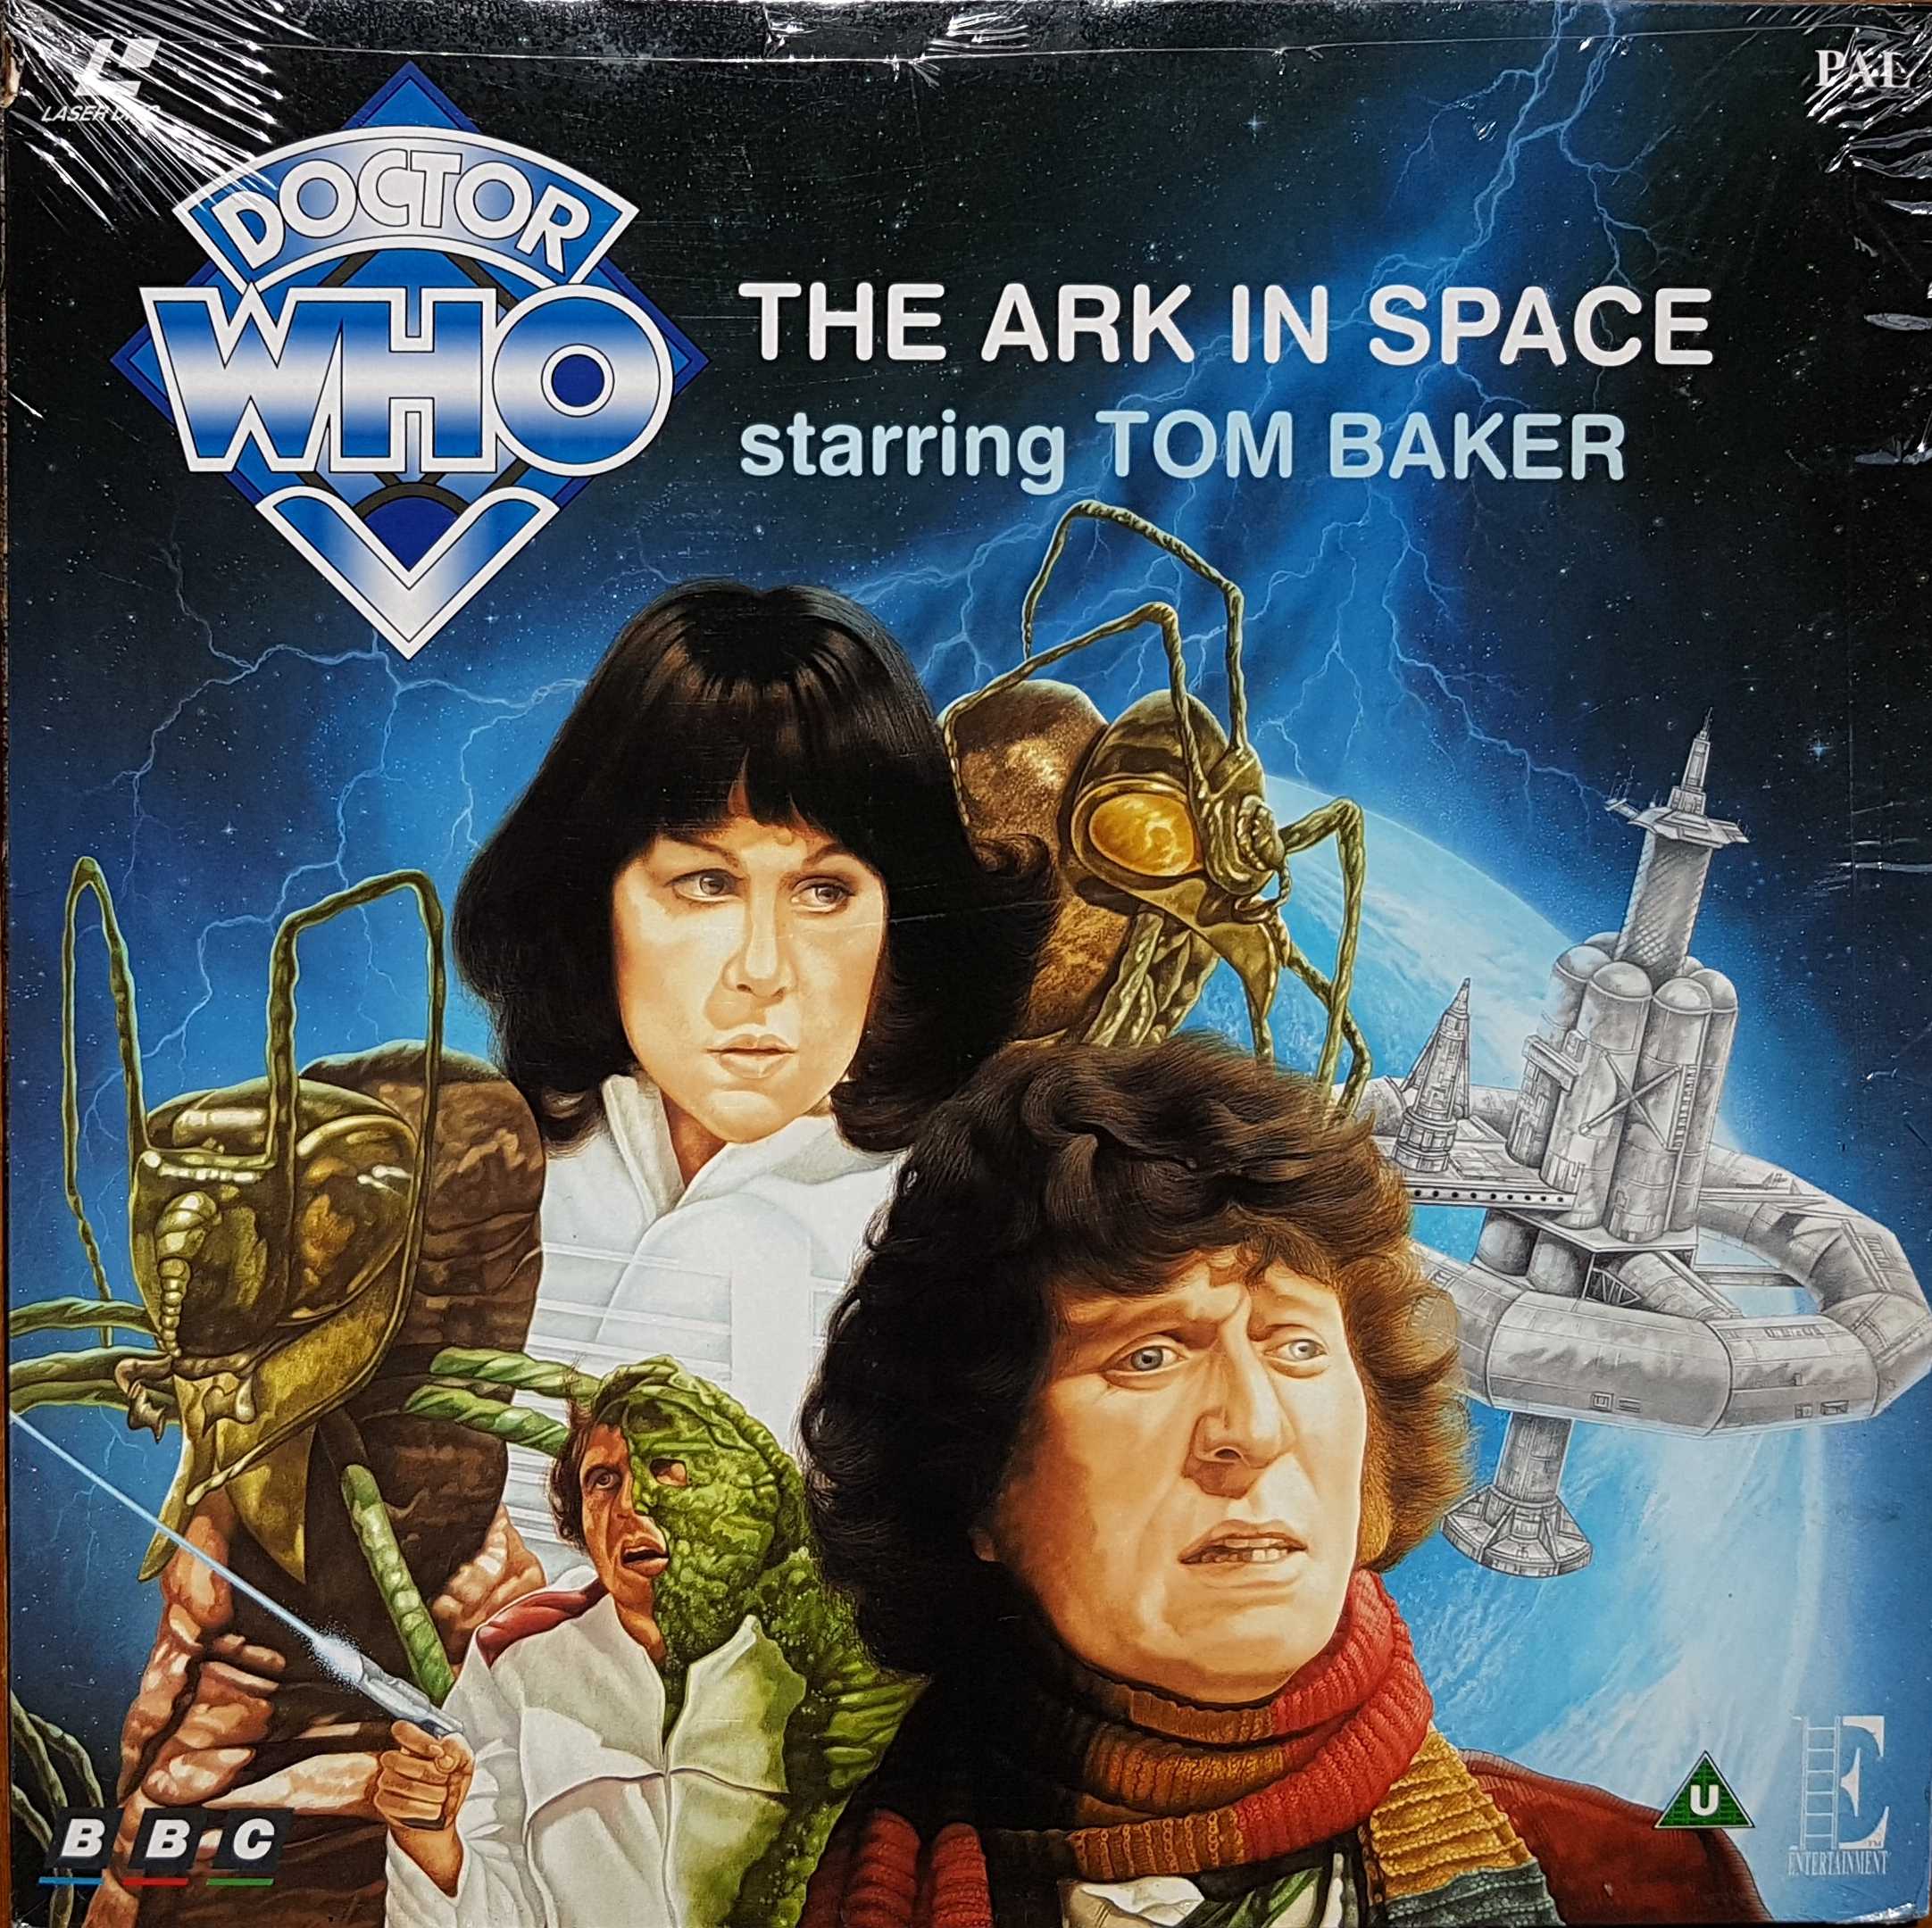 Picture of EE 1158 Doctor Who - The ark in space by artist Robert Holmes / John Lucarotti from the BBC anything_else - Records and Tapes library